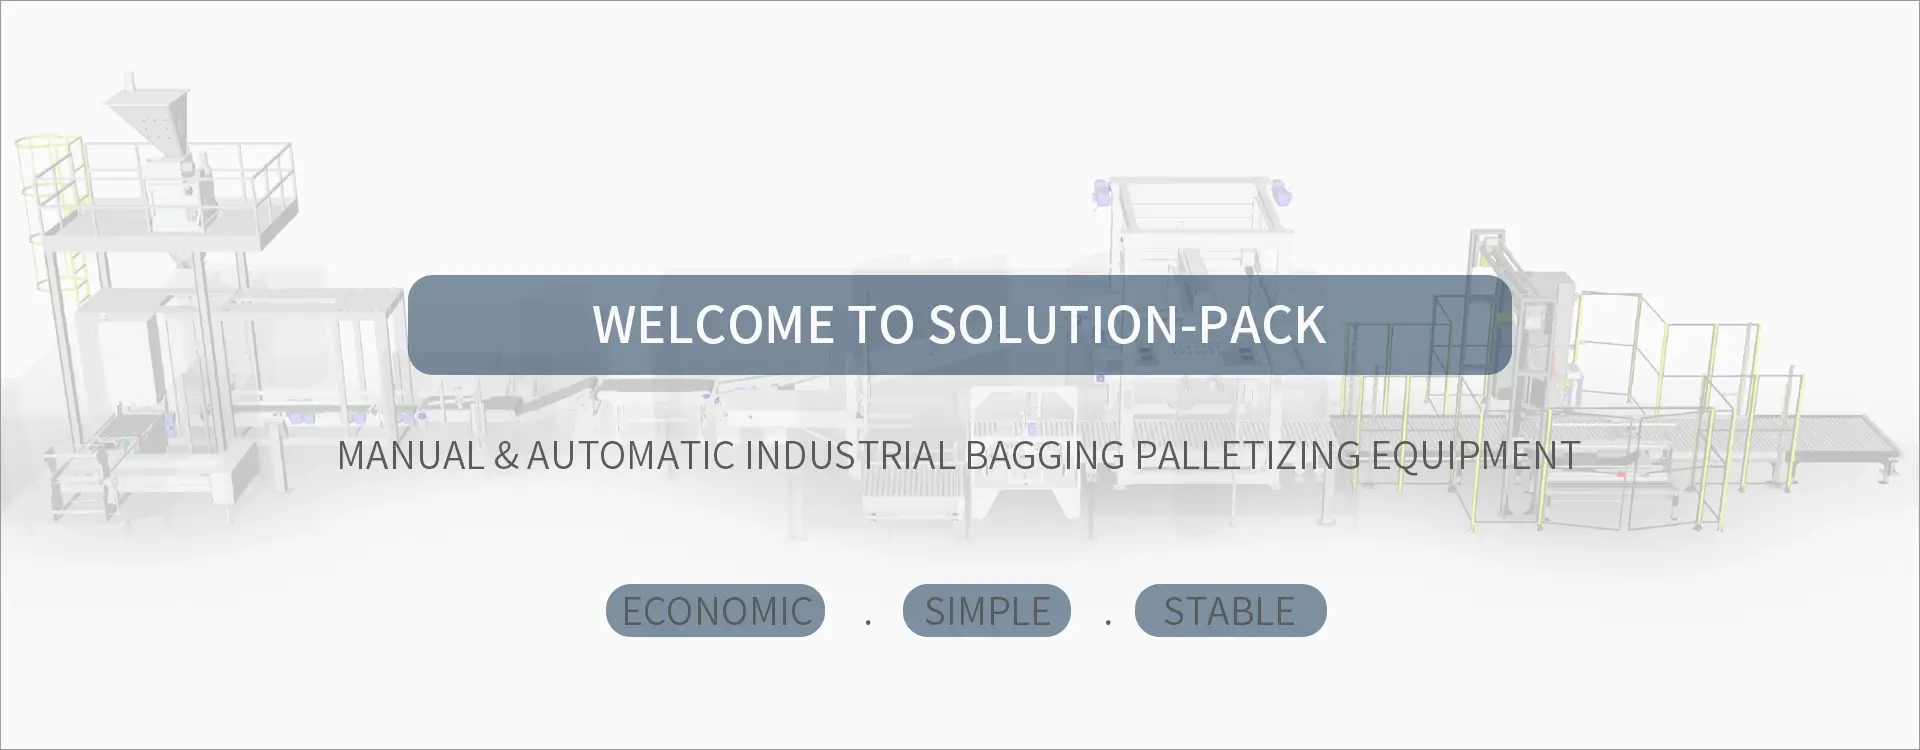 Industrial Bagging Solution | Manual & Automatic Bagging Palletizing Equipment Bottom Banner Picture